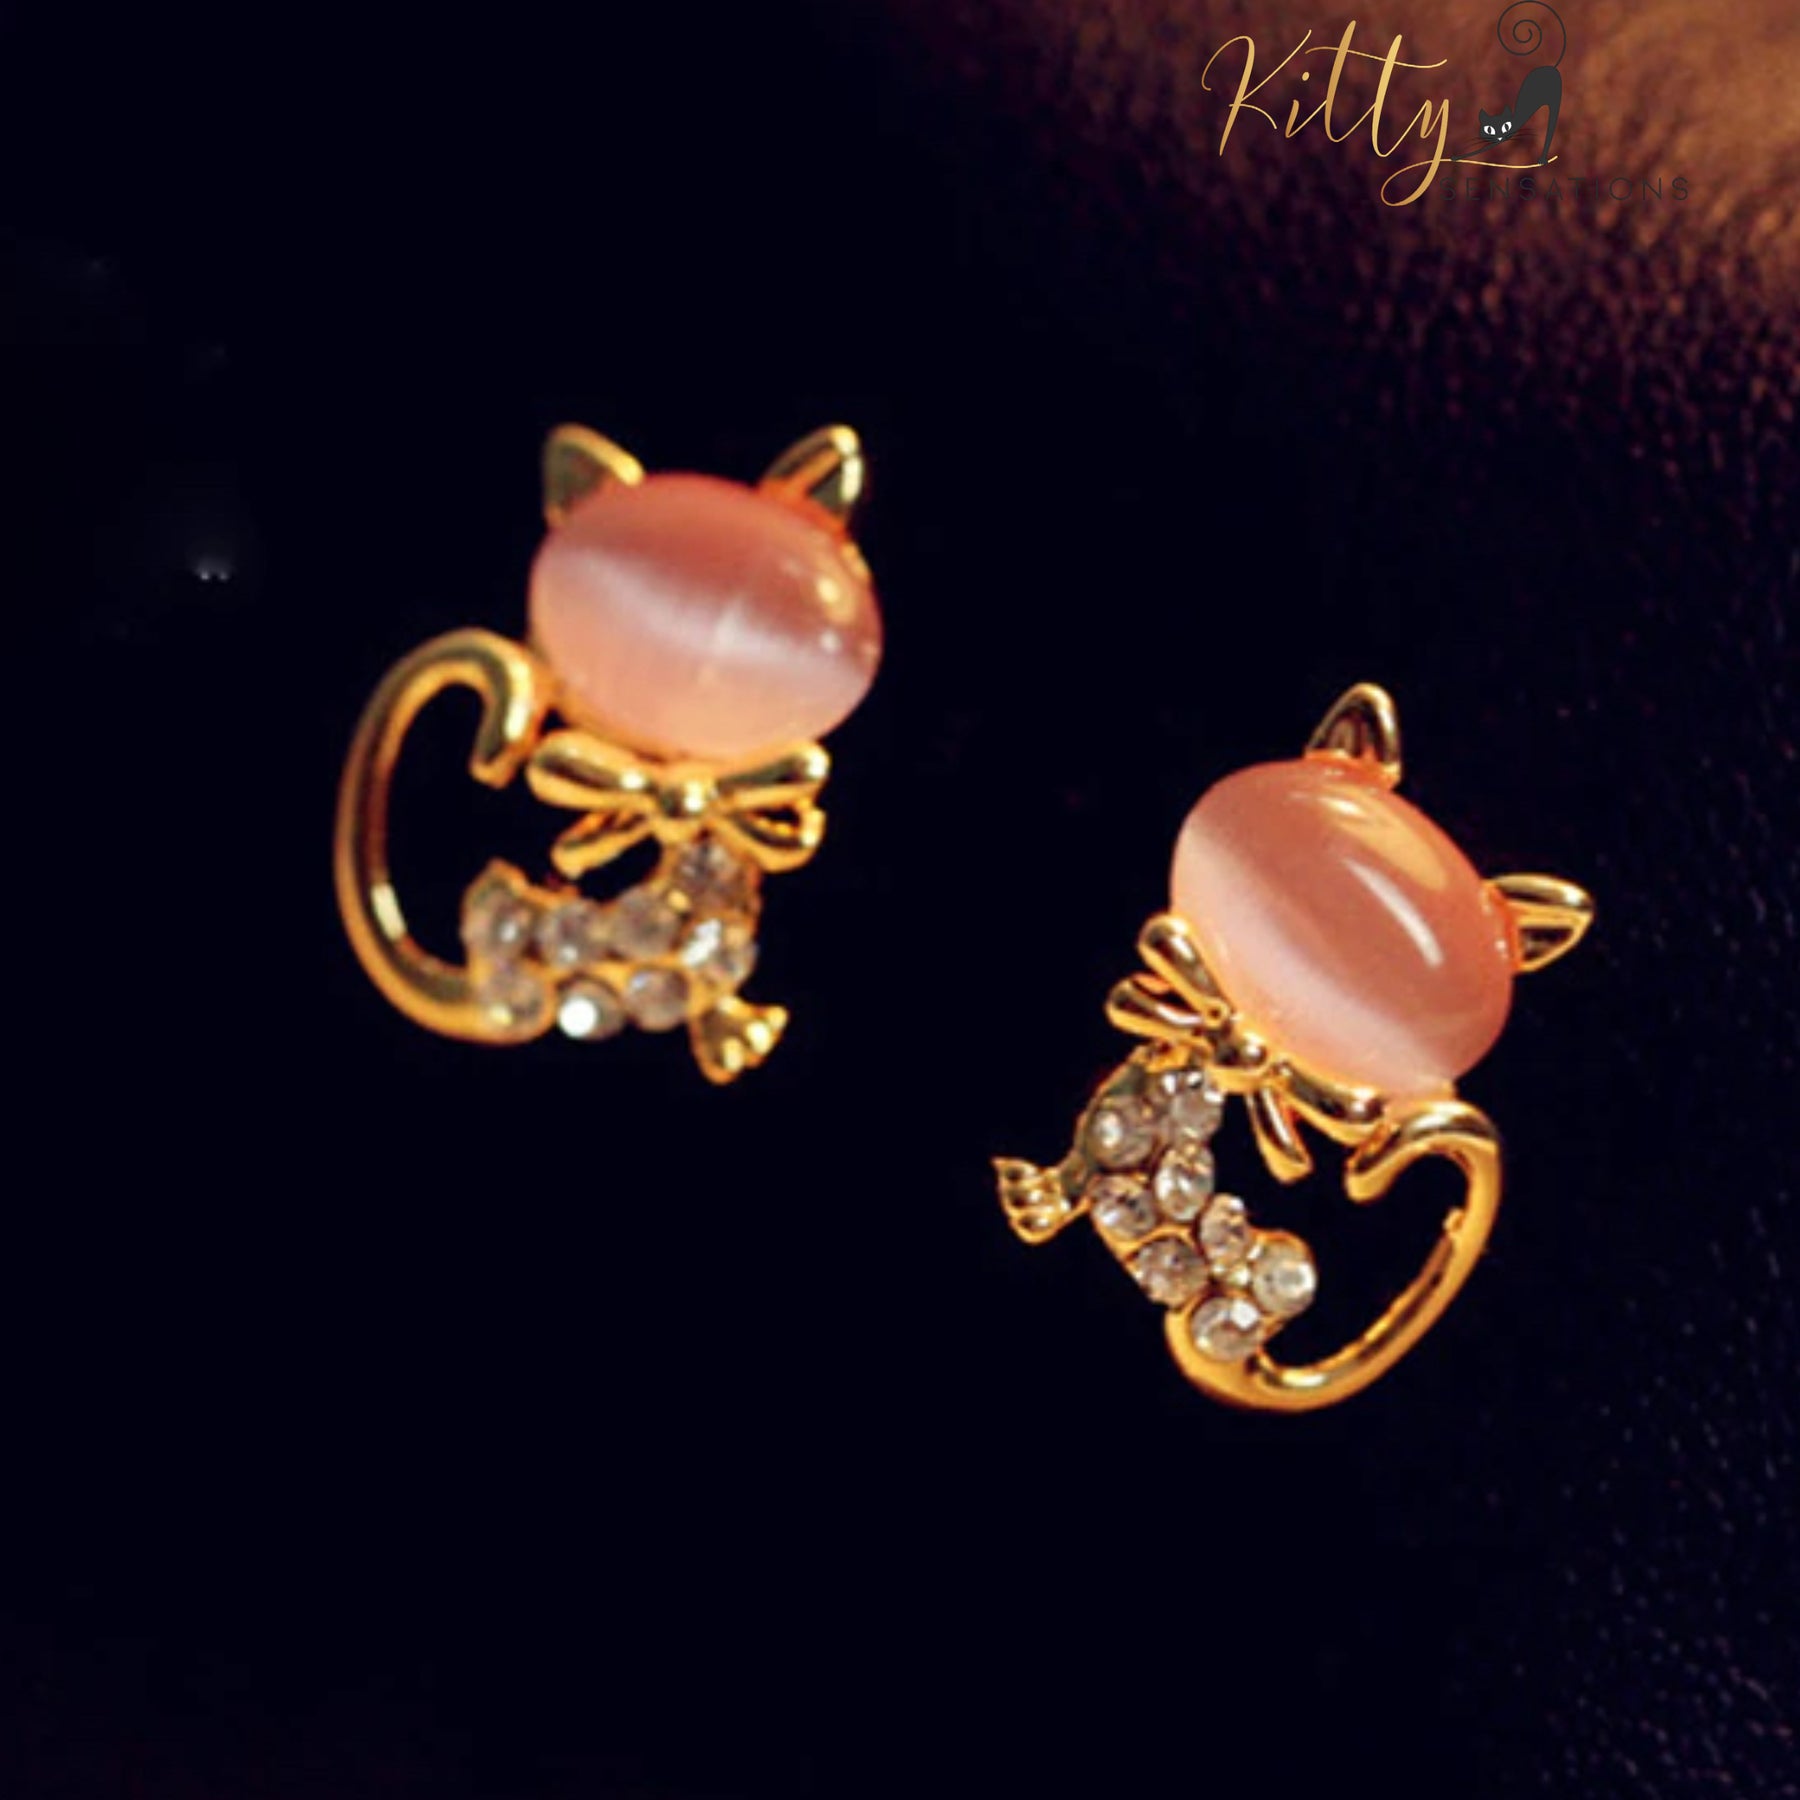 Natural Opal Bow Cat CZ Stud Earrings (White or Pink)